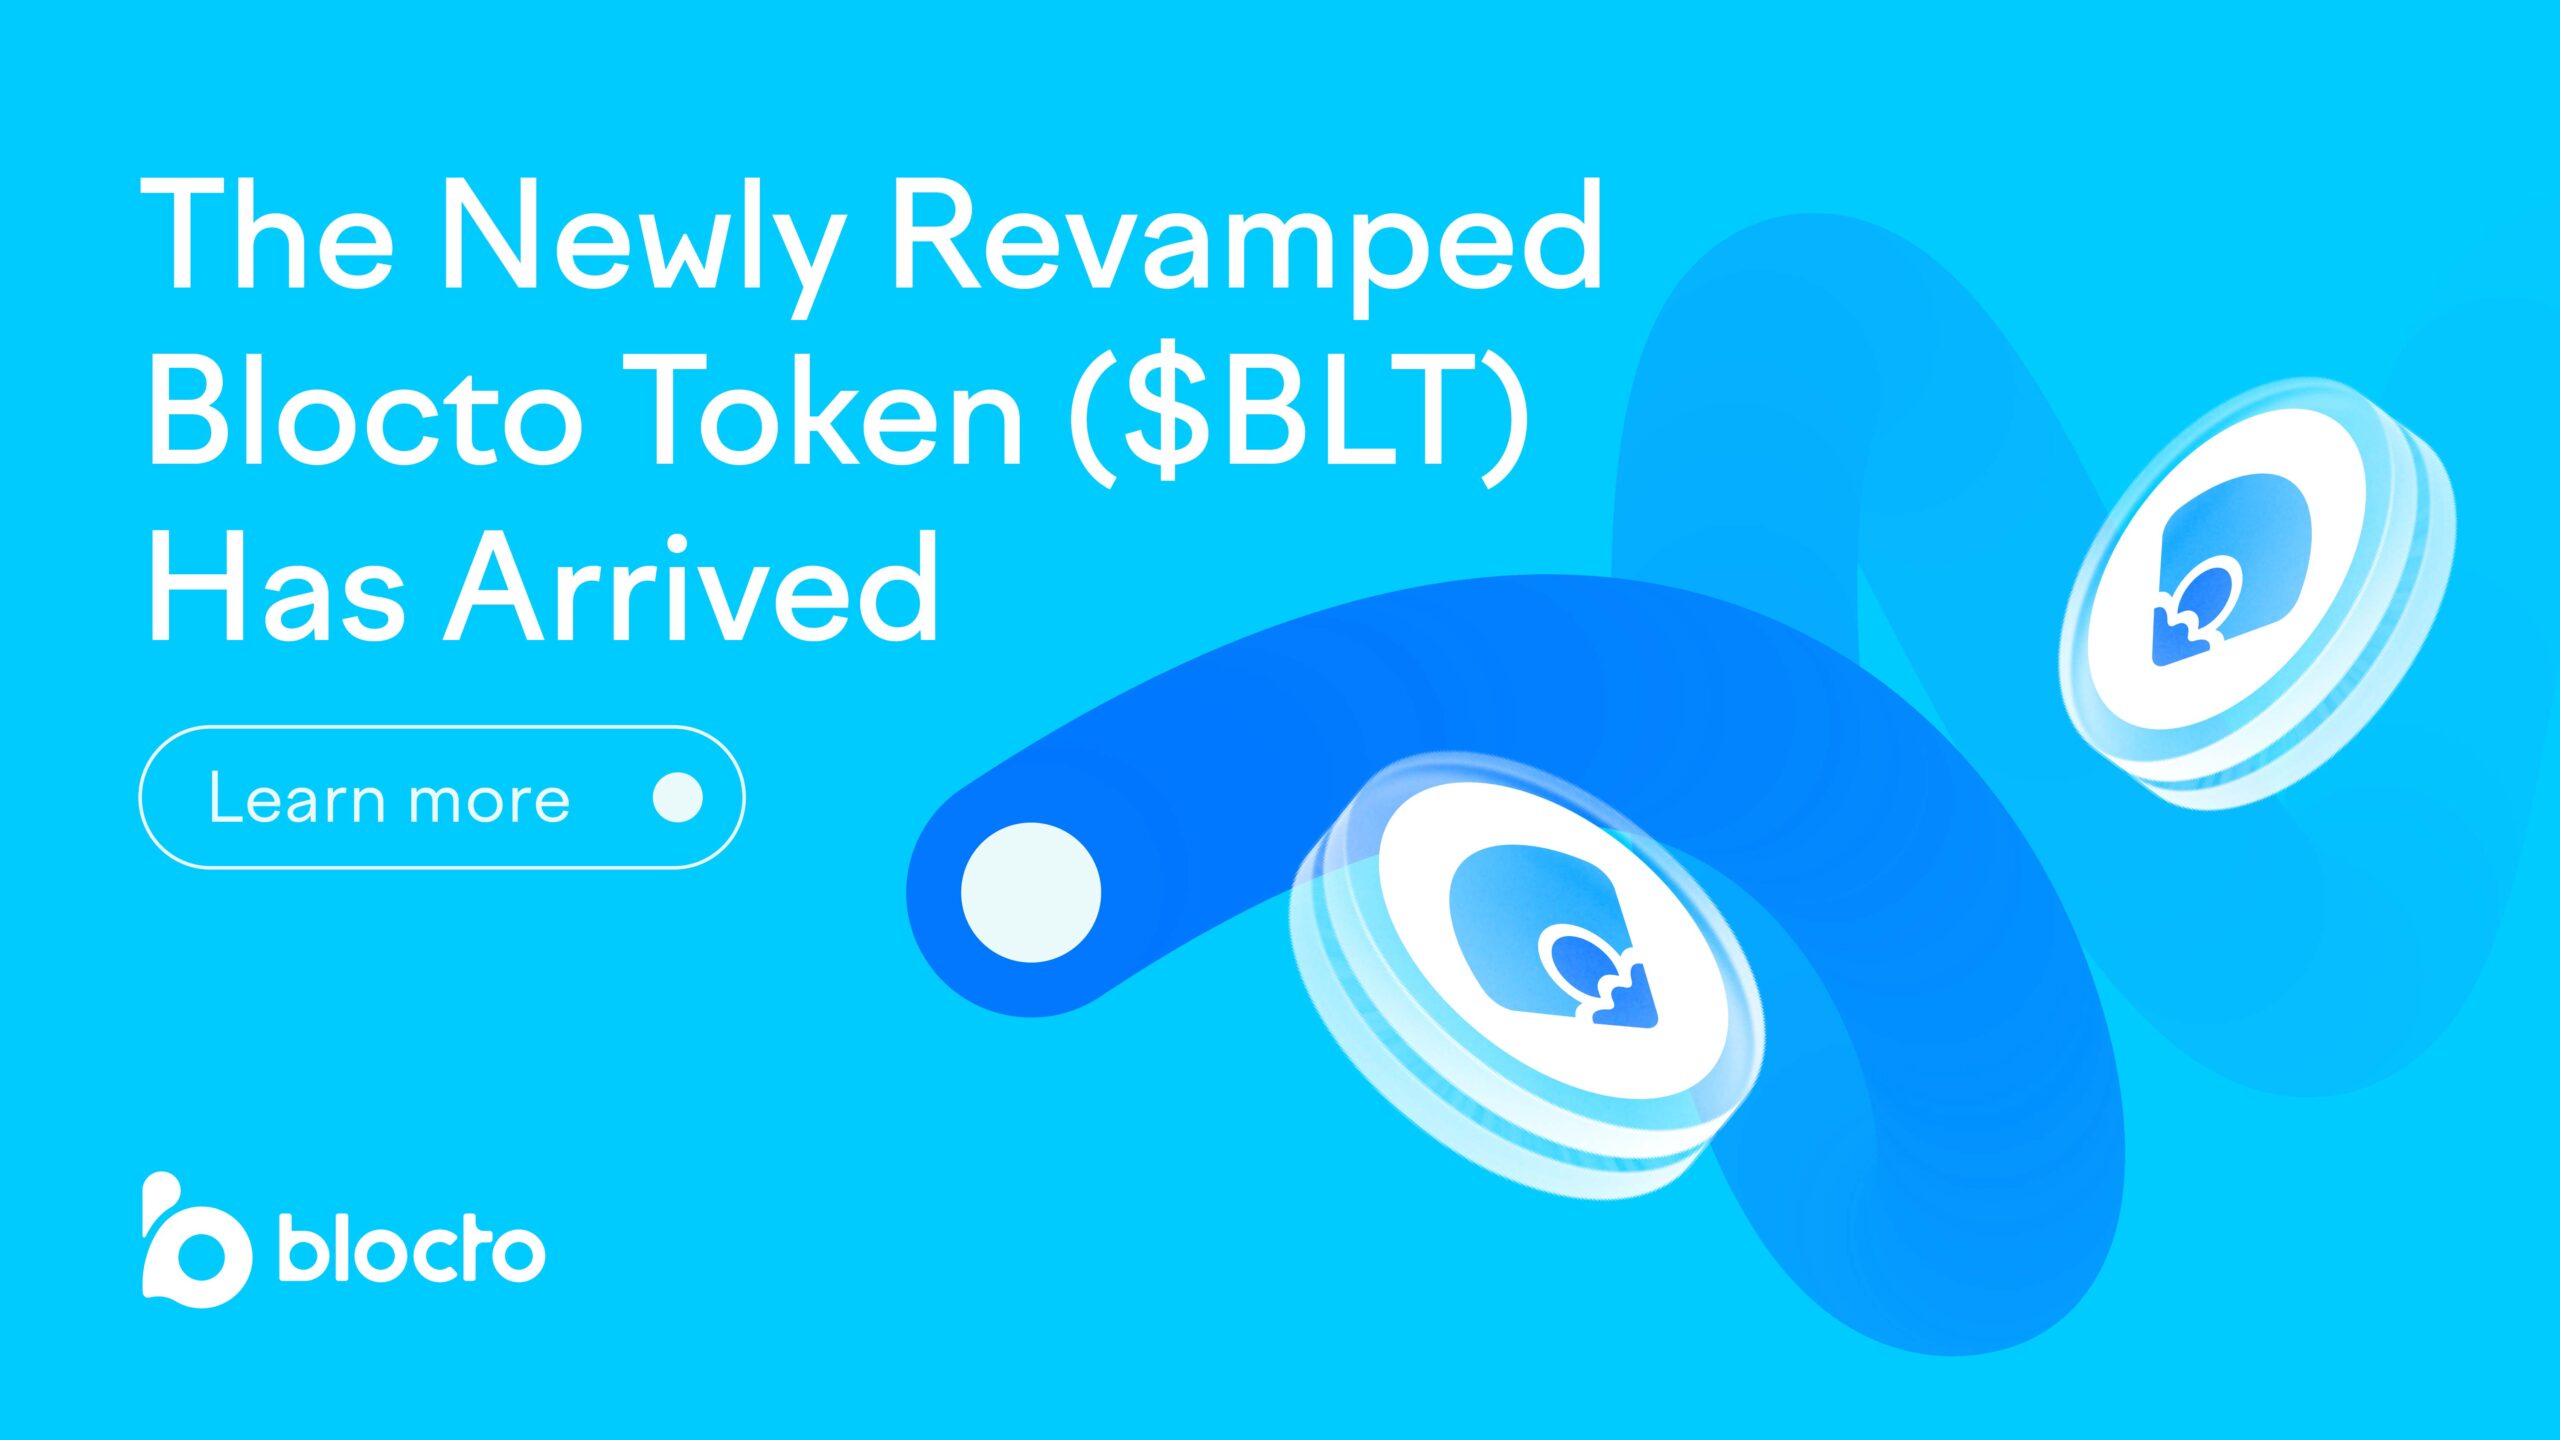 newly revamped blocto token ($blt) has arrived